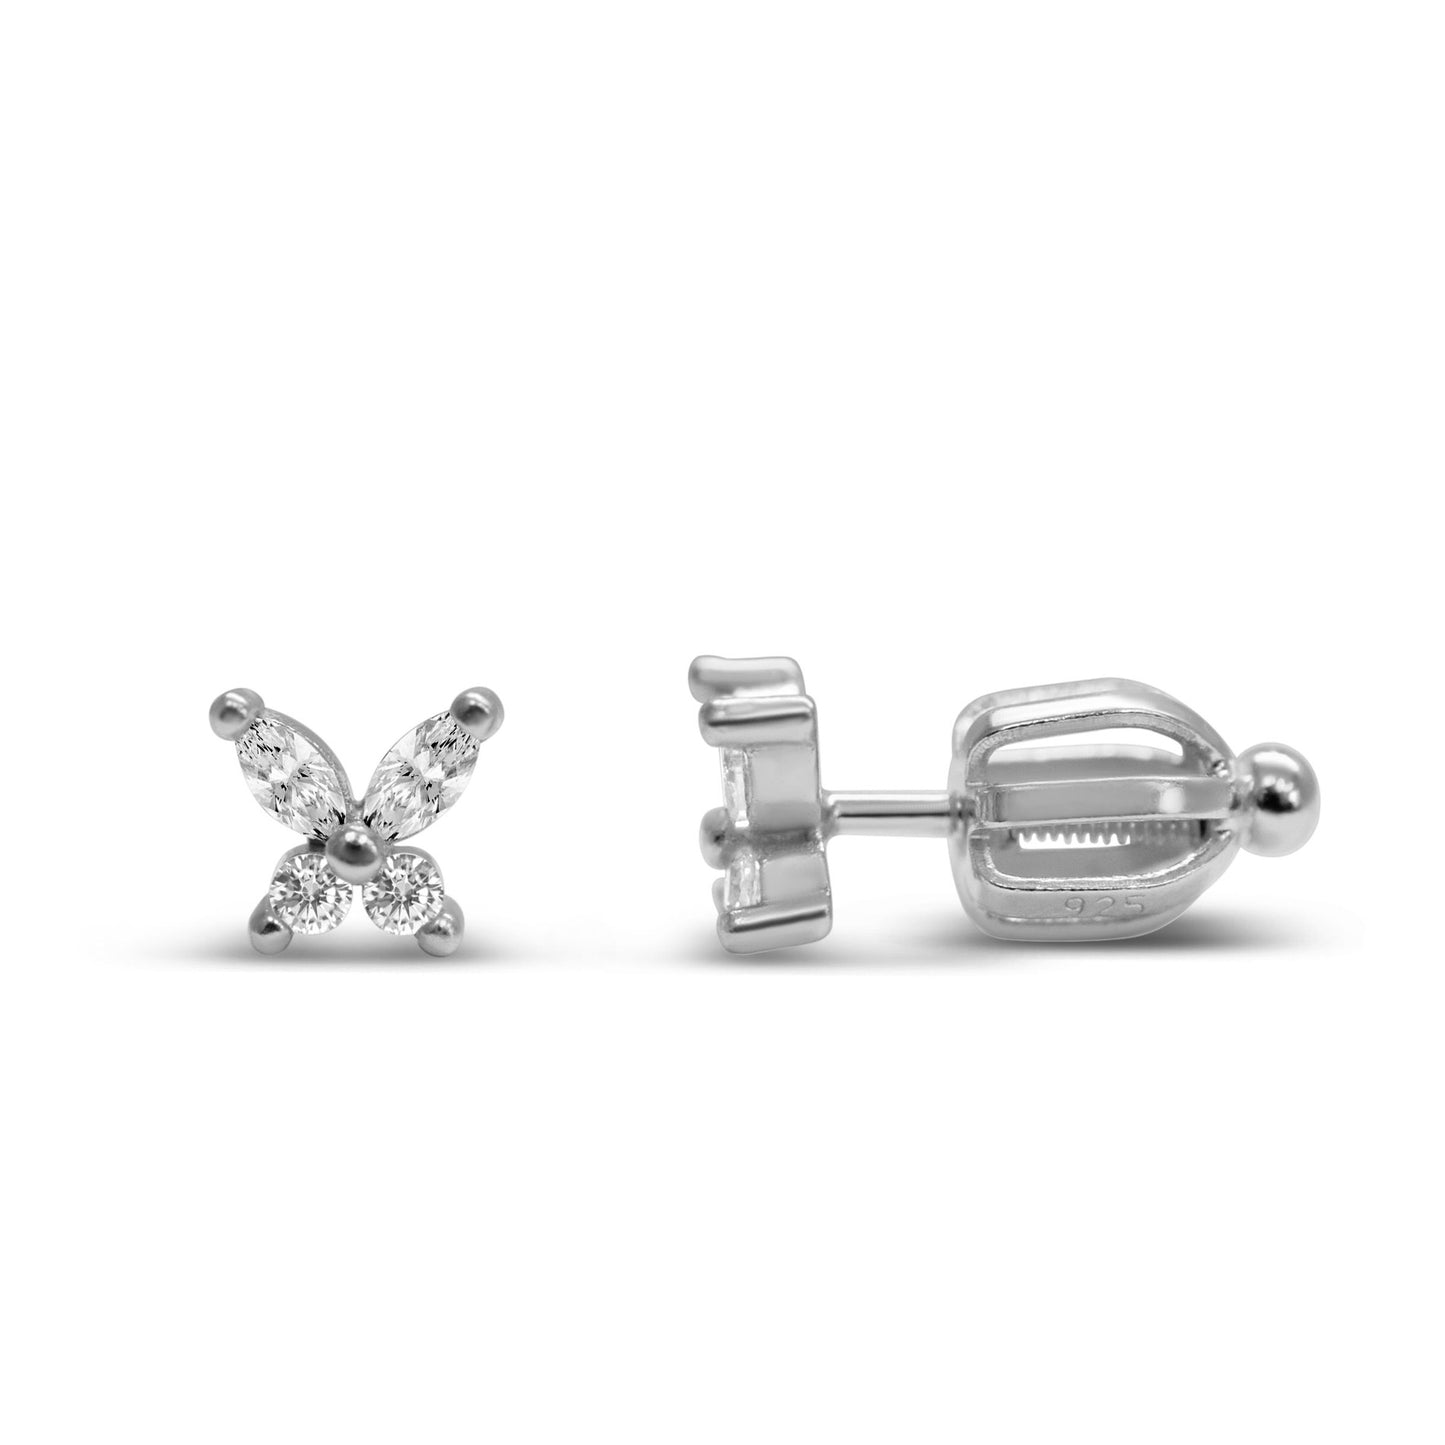 Born to Fly Butterfly Earring